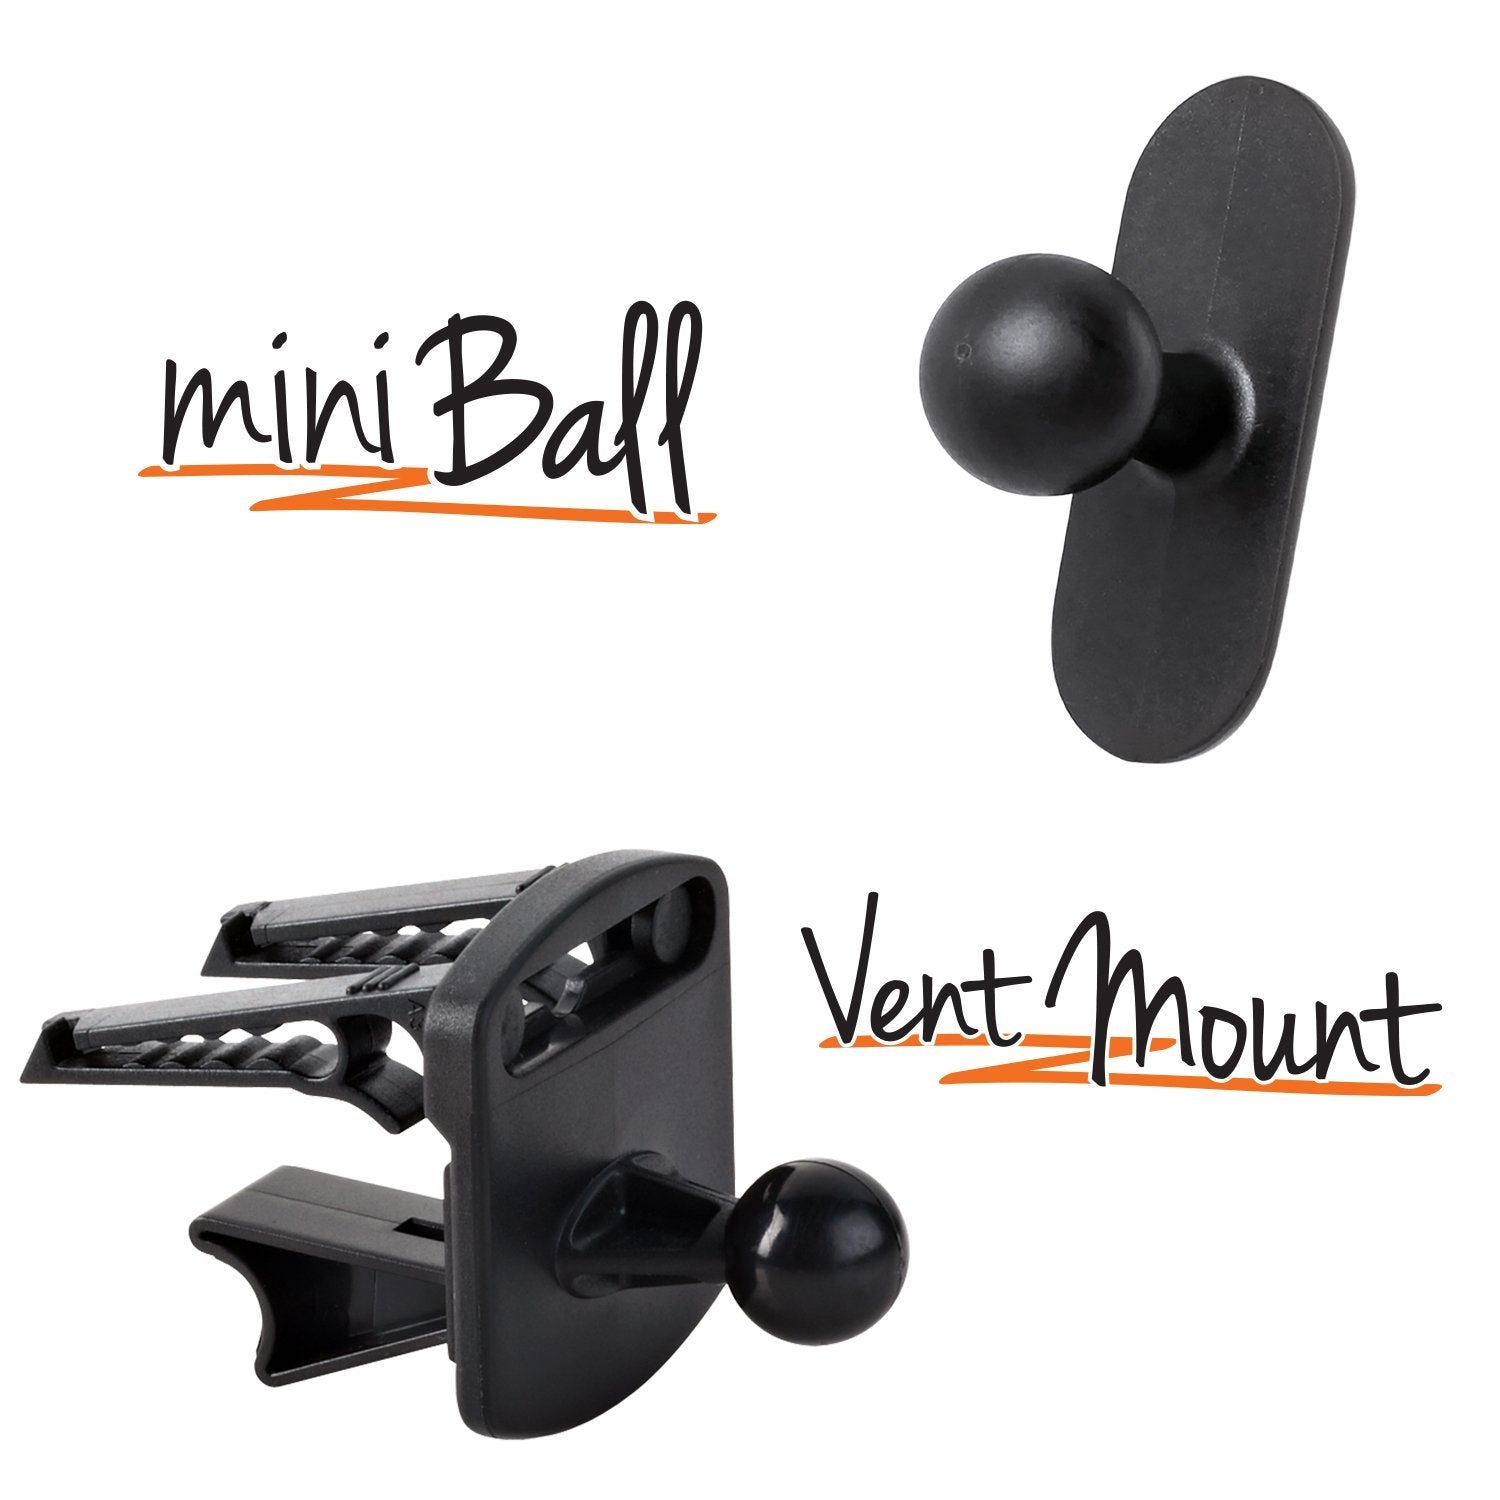 17mm miniBall mount and Vent mount